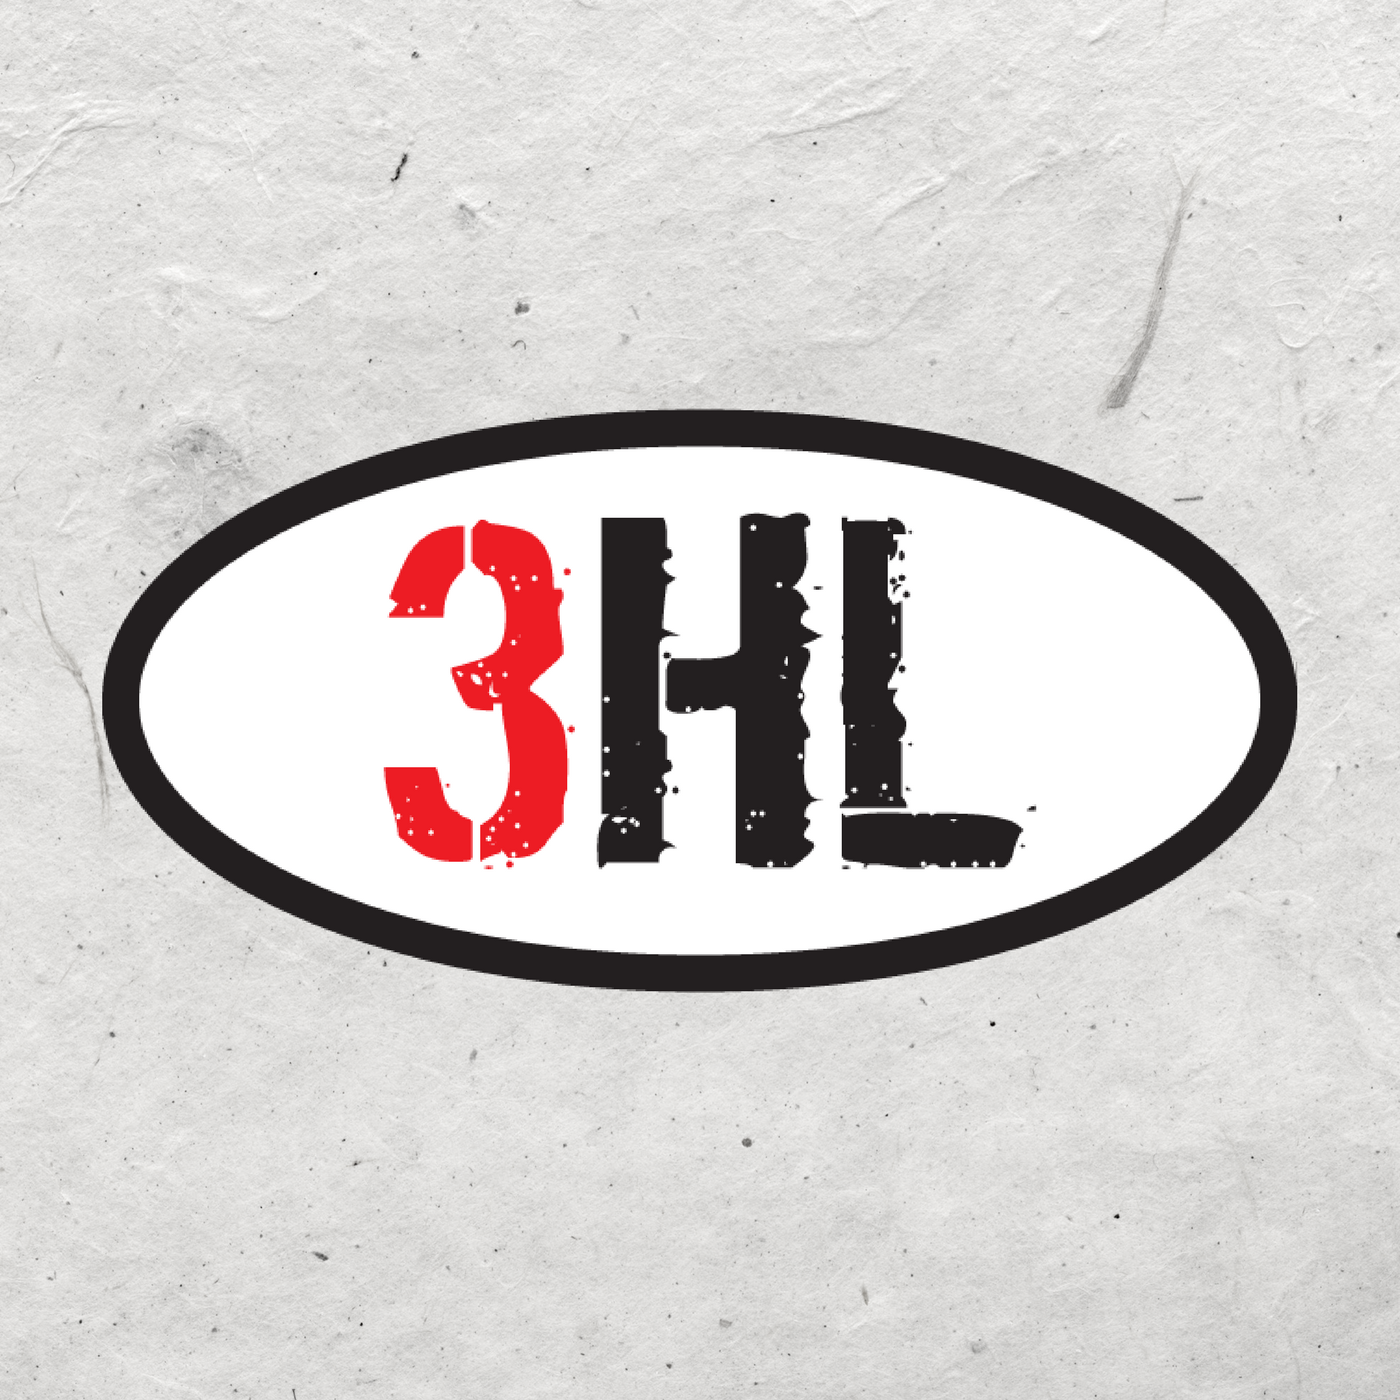 Chris Low on 3HL - The Most Action in College Athletics May Happen in Court